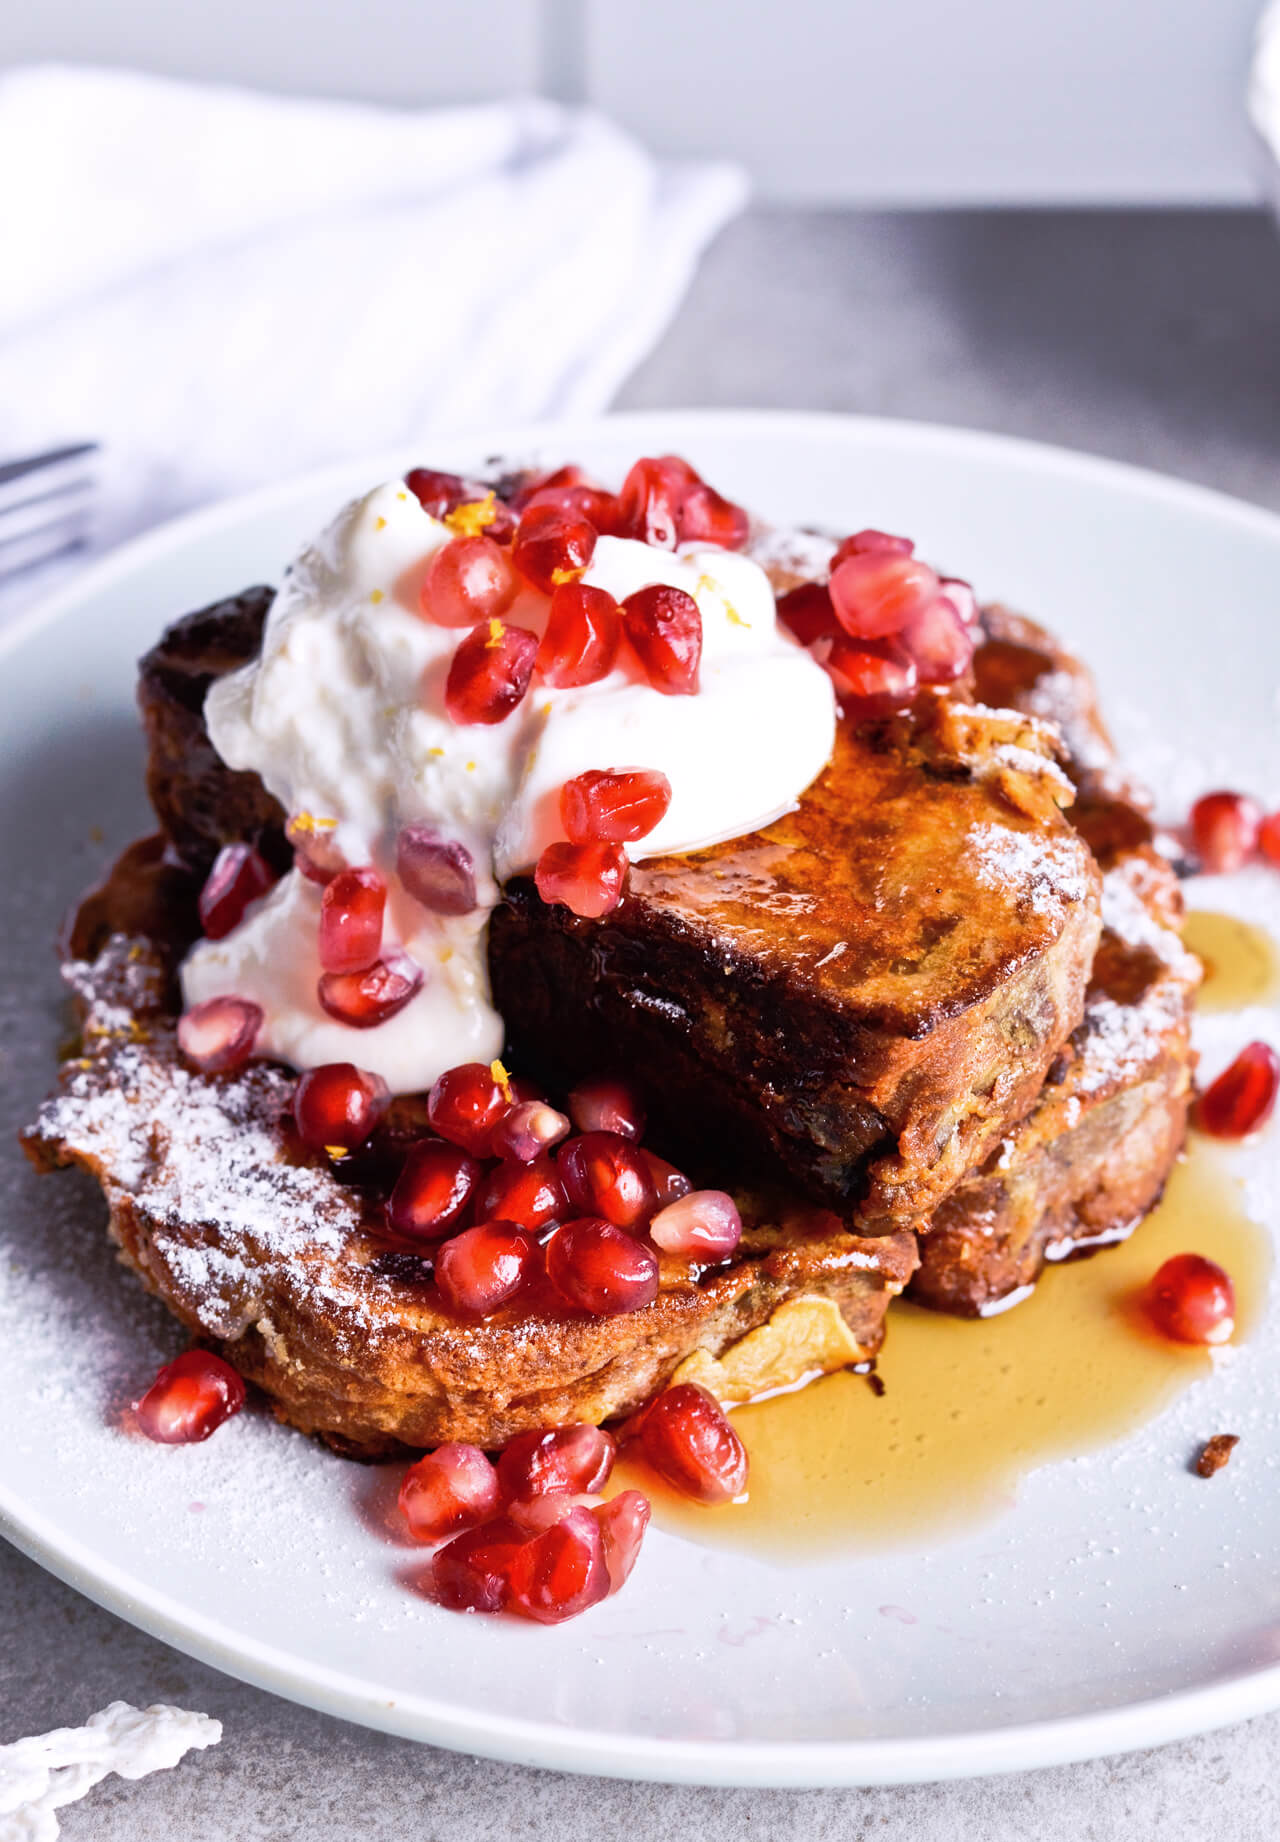 Recipe for Orange yogurt Stollen french toast. Christmas Stollen prepared as classic french toast, topped with creamy orange Greek yogurt, pomegranate seeds, maple syrup. Perfect breakfast or brunch recipe. | @mitzyathome sugarsalted.com